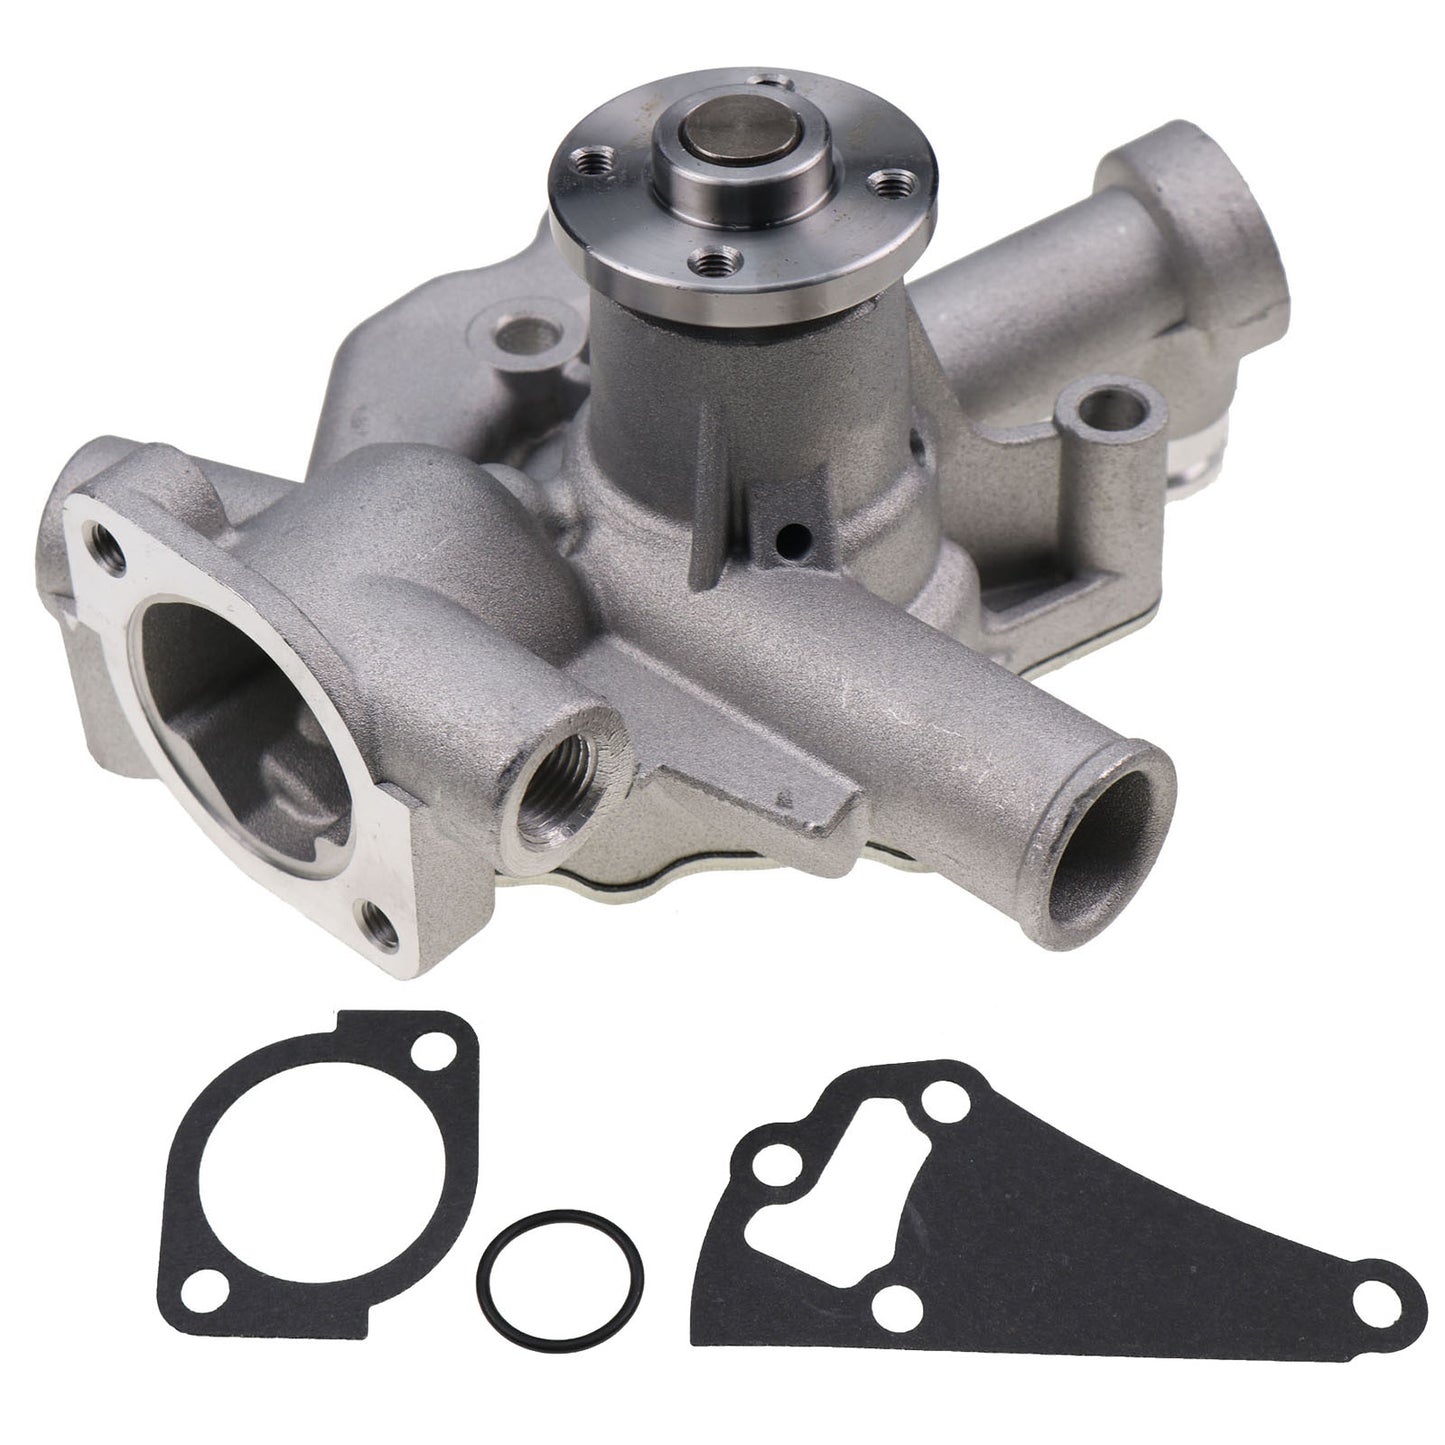 New AM881433 Water Pump Compatible with John Deere F925 F932 F935 2210 4100 4110 455 670